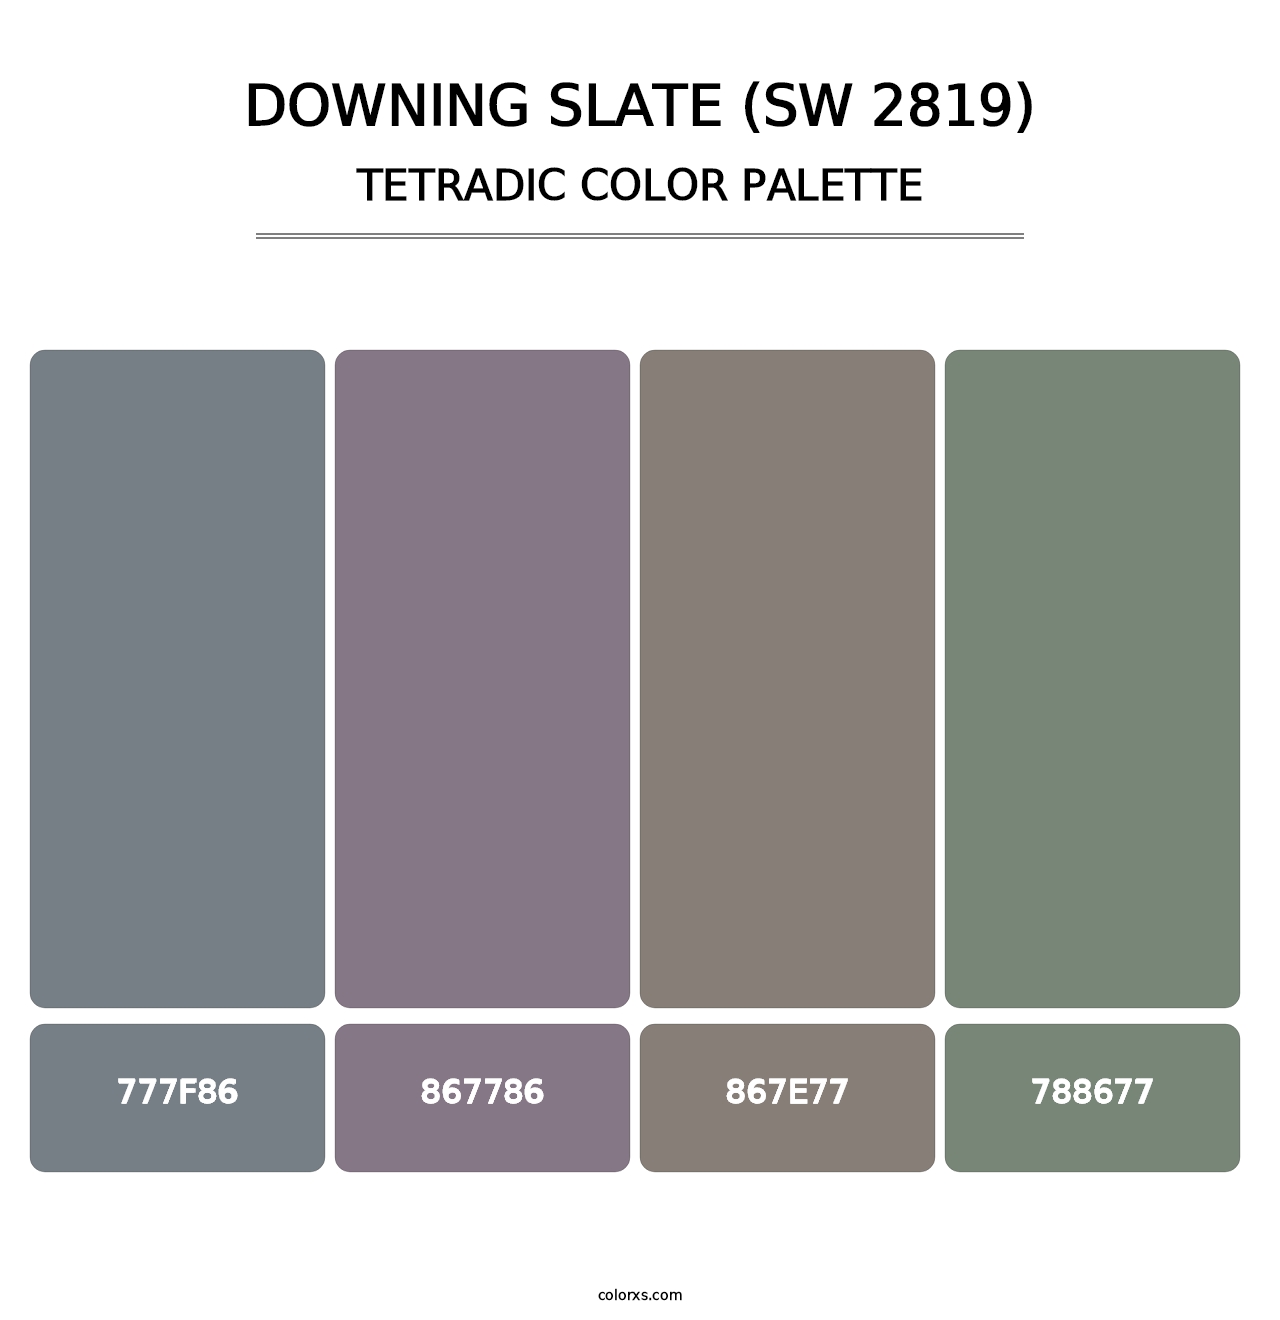 Downing Slate (SW 2819) - Tetradic Color Palette